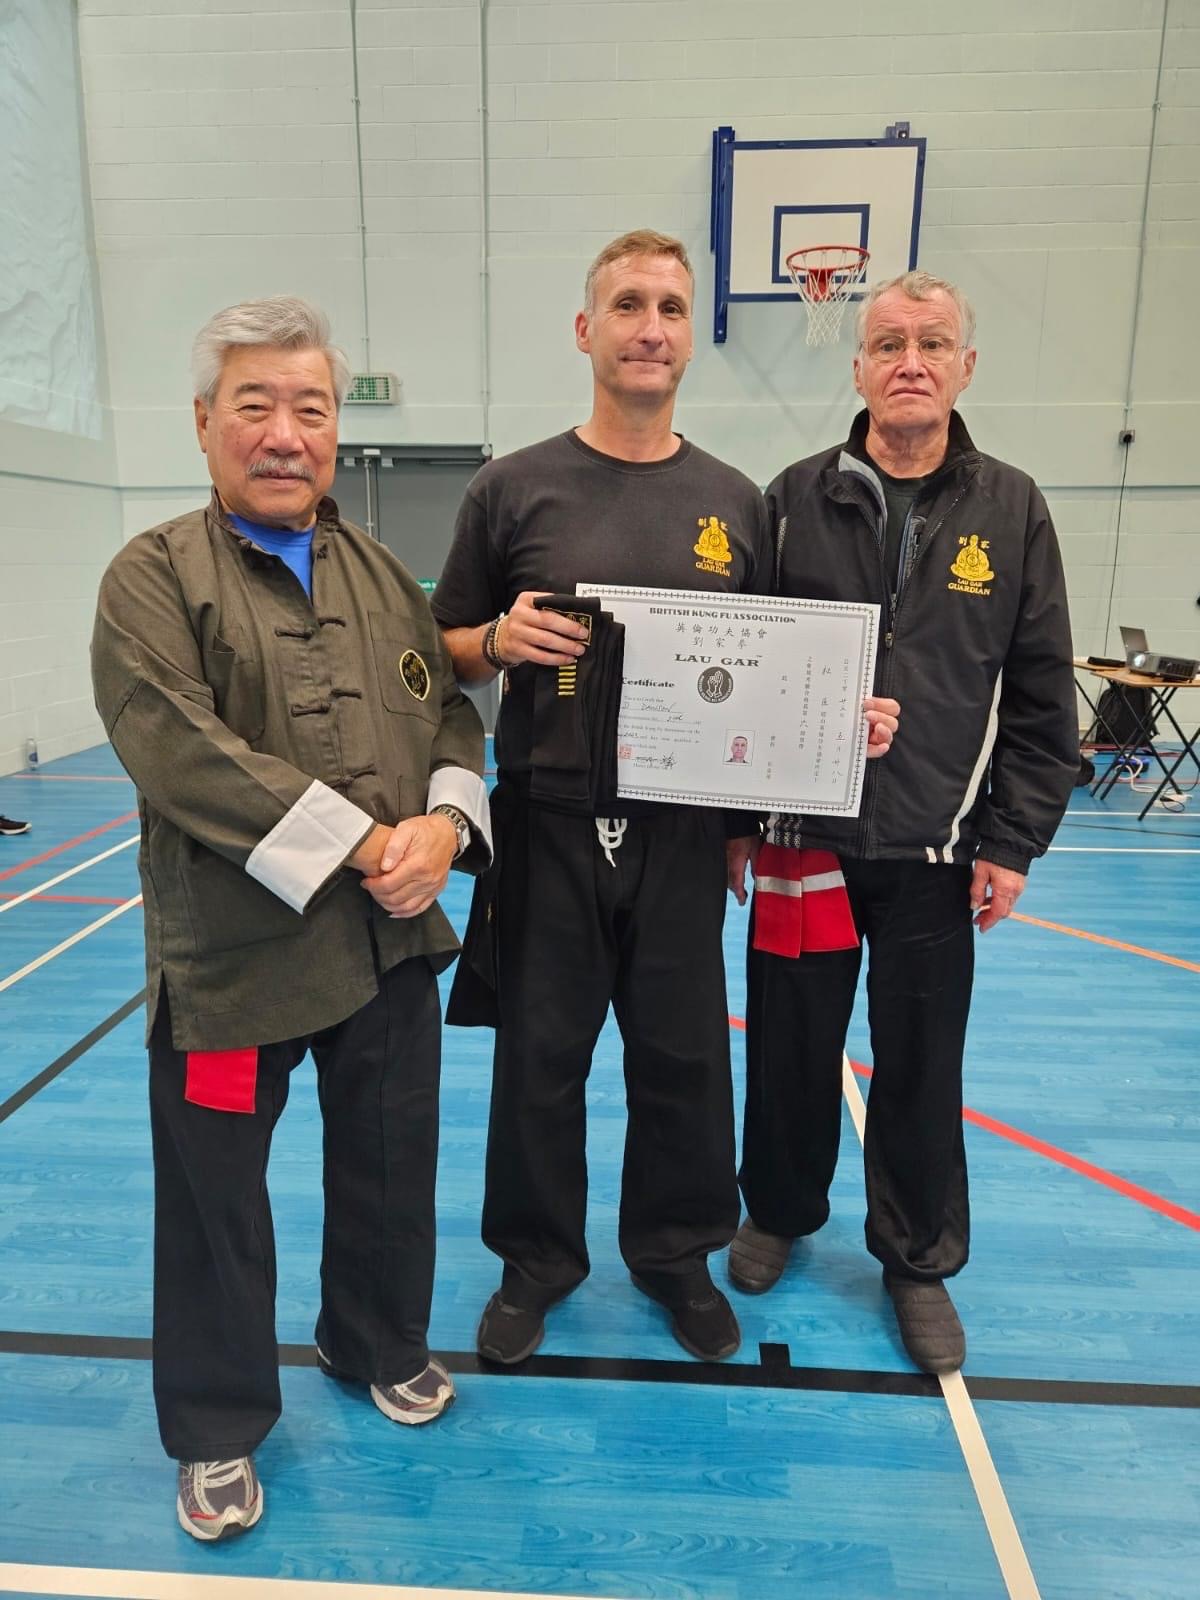 Our Sifu and Guardian Derek Dawson receiving his 6th Degree Black Sash and Certificate from Grand Master Yau and Master Russel.